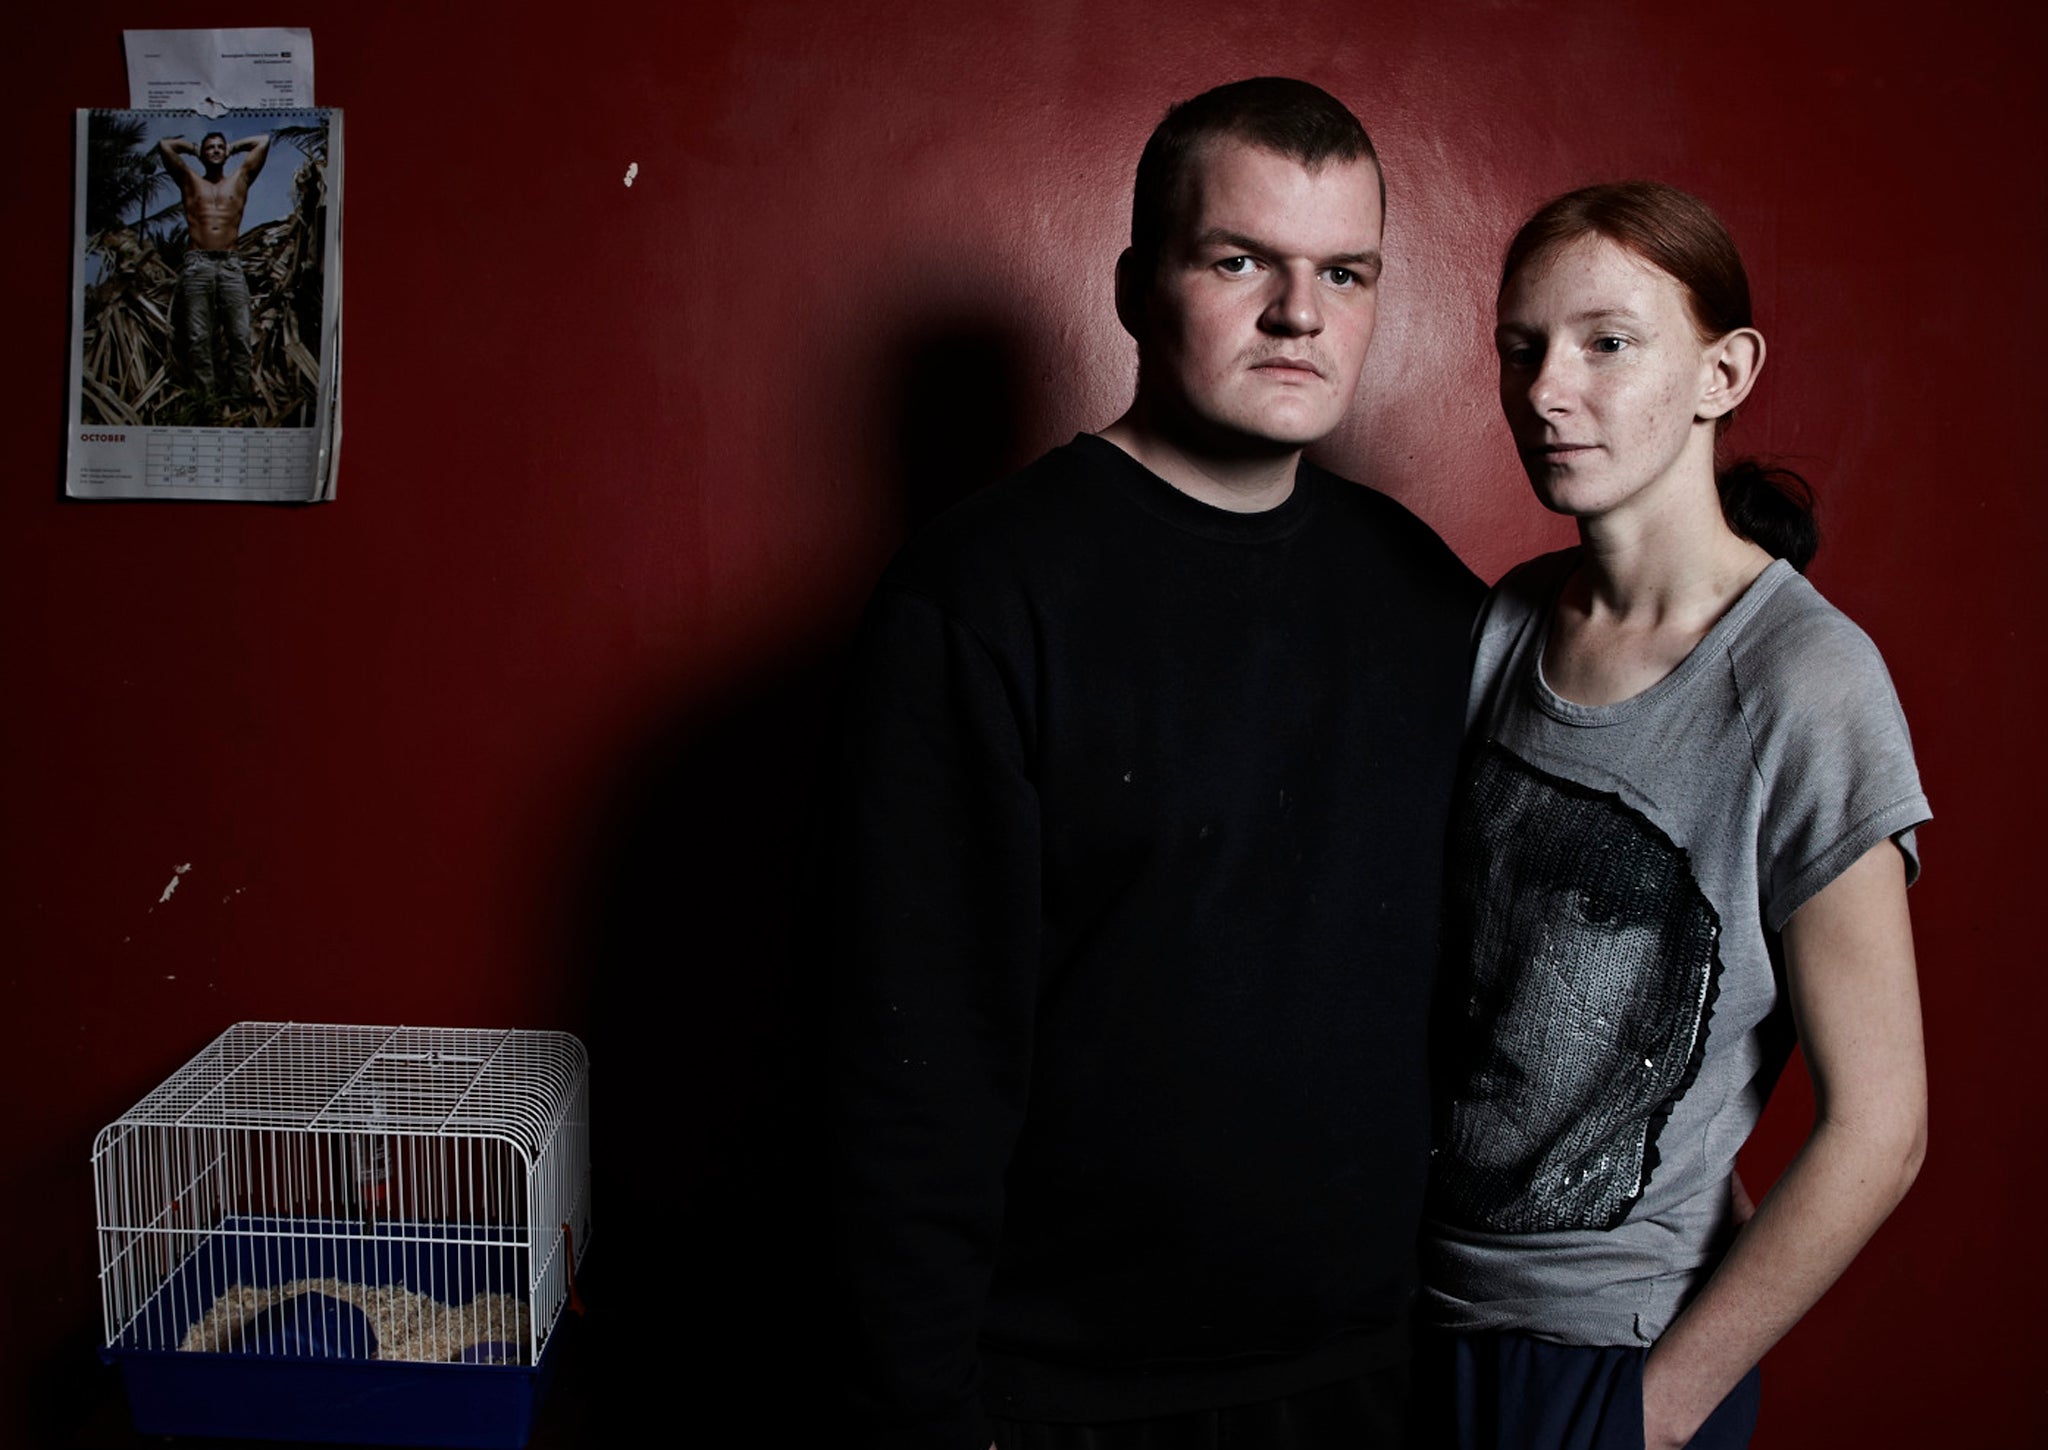 Mark Thomas and Becky Howe, both 23, are 'fuming' over their presentation in Benefits Street